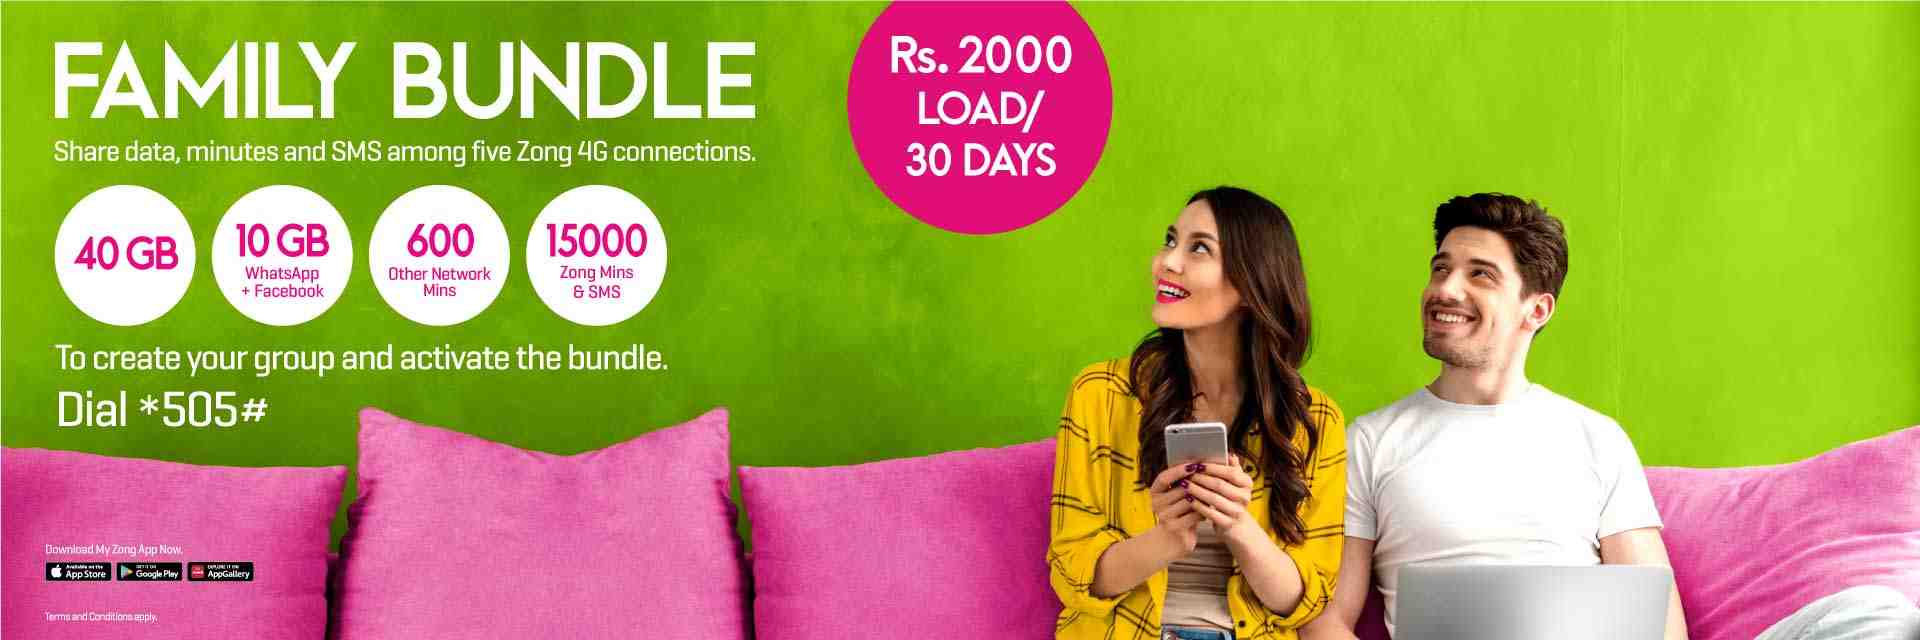 Zong Family Bundle Plan Code and Details